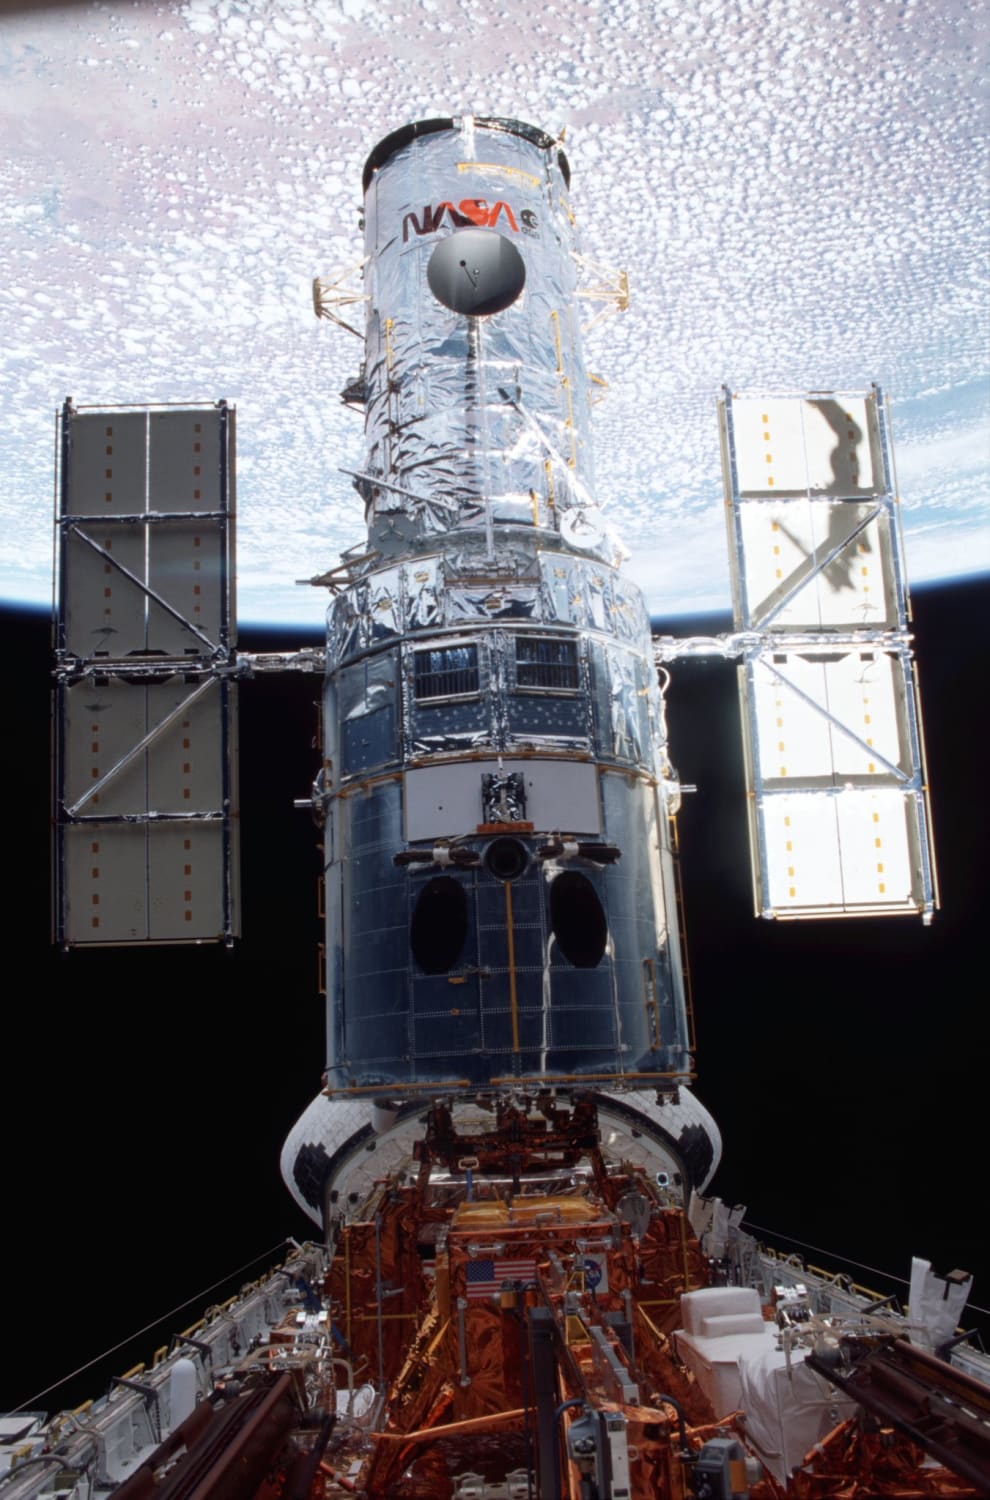 ✨Feeling rejuvenated!✨ OTD in 2002, the Space Shuttle Columbia redeployed @NASAHubble after the crew of STS-109 performed a series of five spacewalks to service the telescope. They installed new and improved equipment including a new camera and an experimental cooling system.